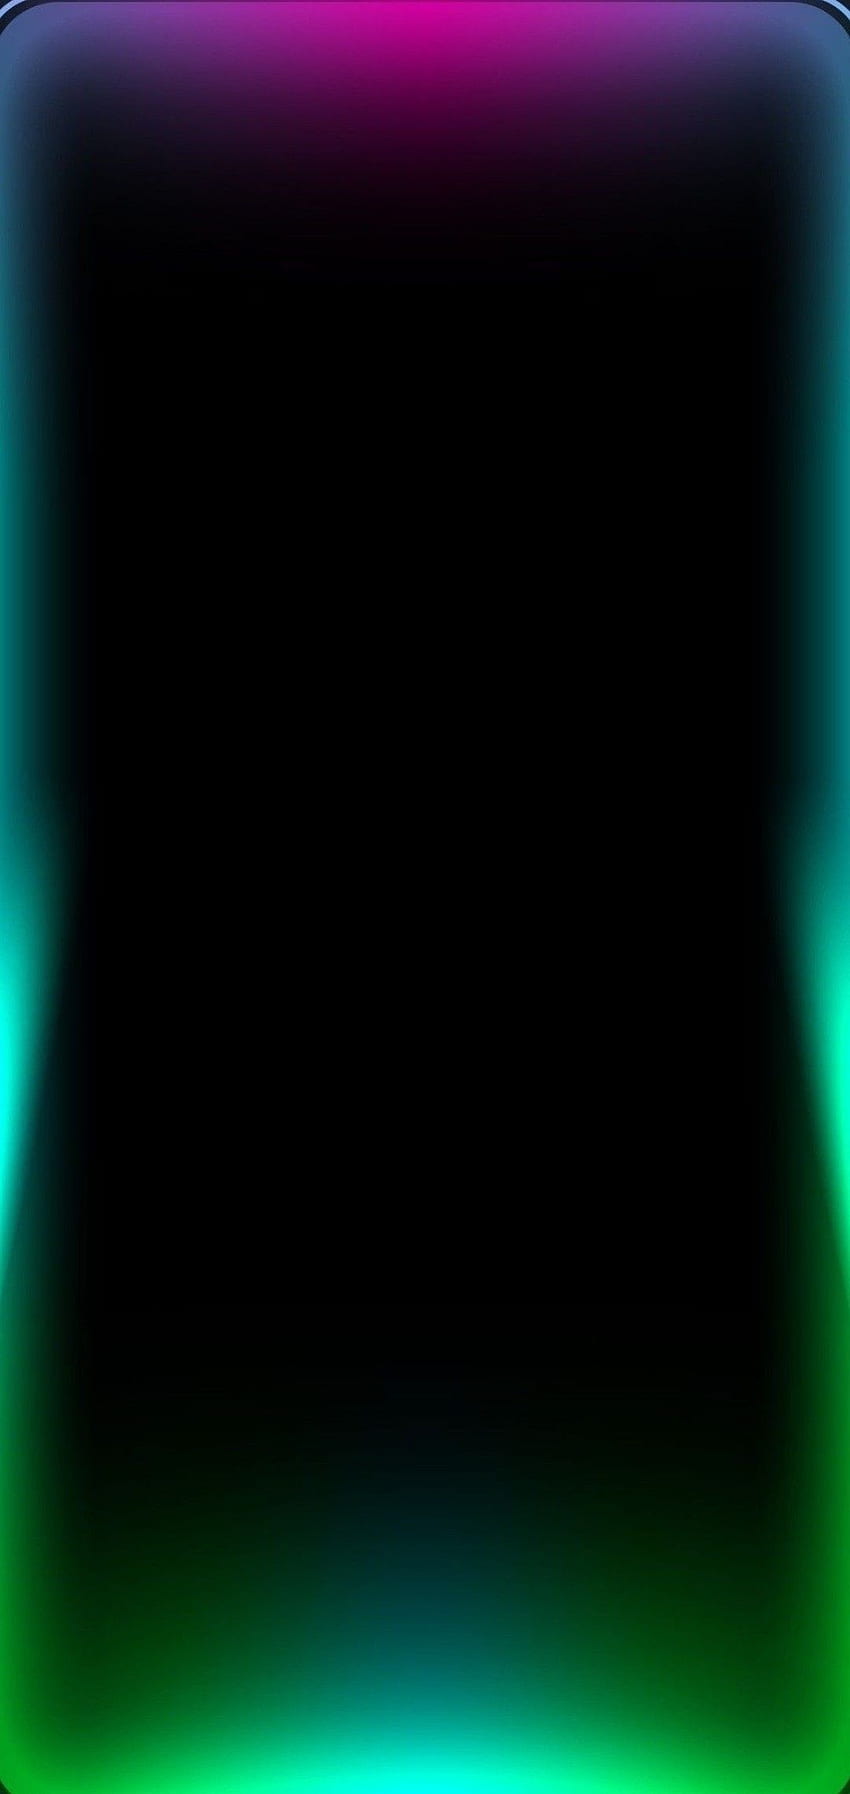 Border Amoled Neon Black Notch Wallpaper – S72 - Chill-out Wallpapers